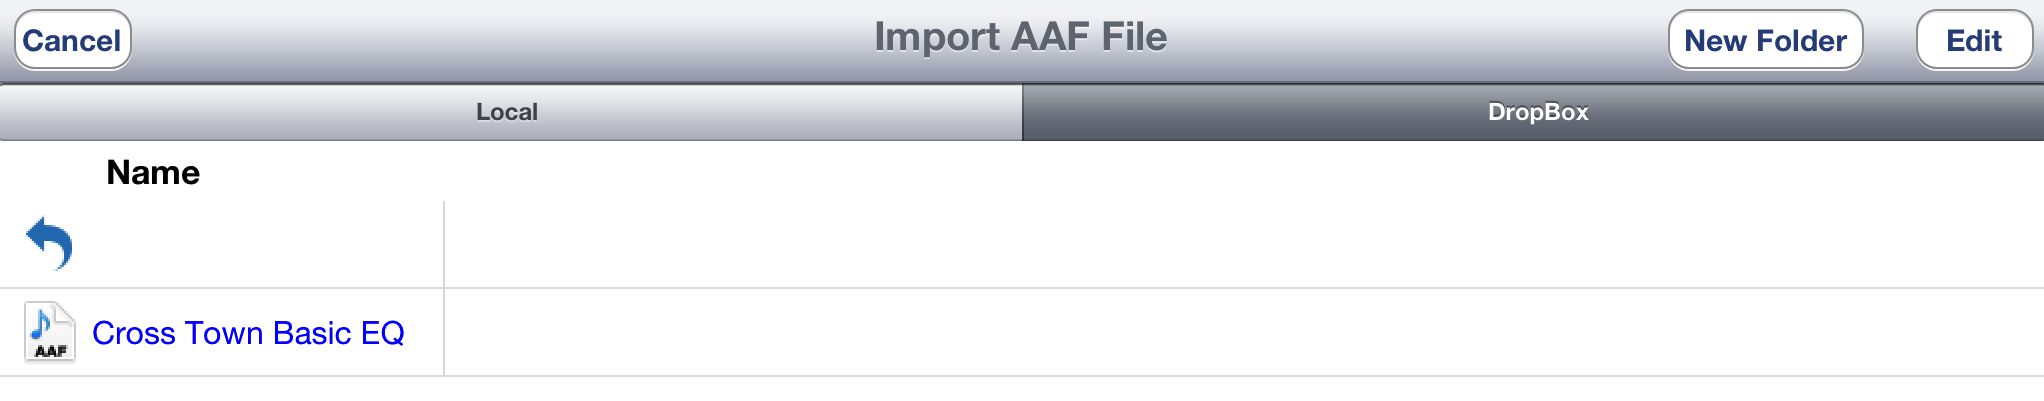 Importing an AAF project file via DropBox